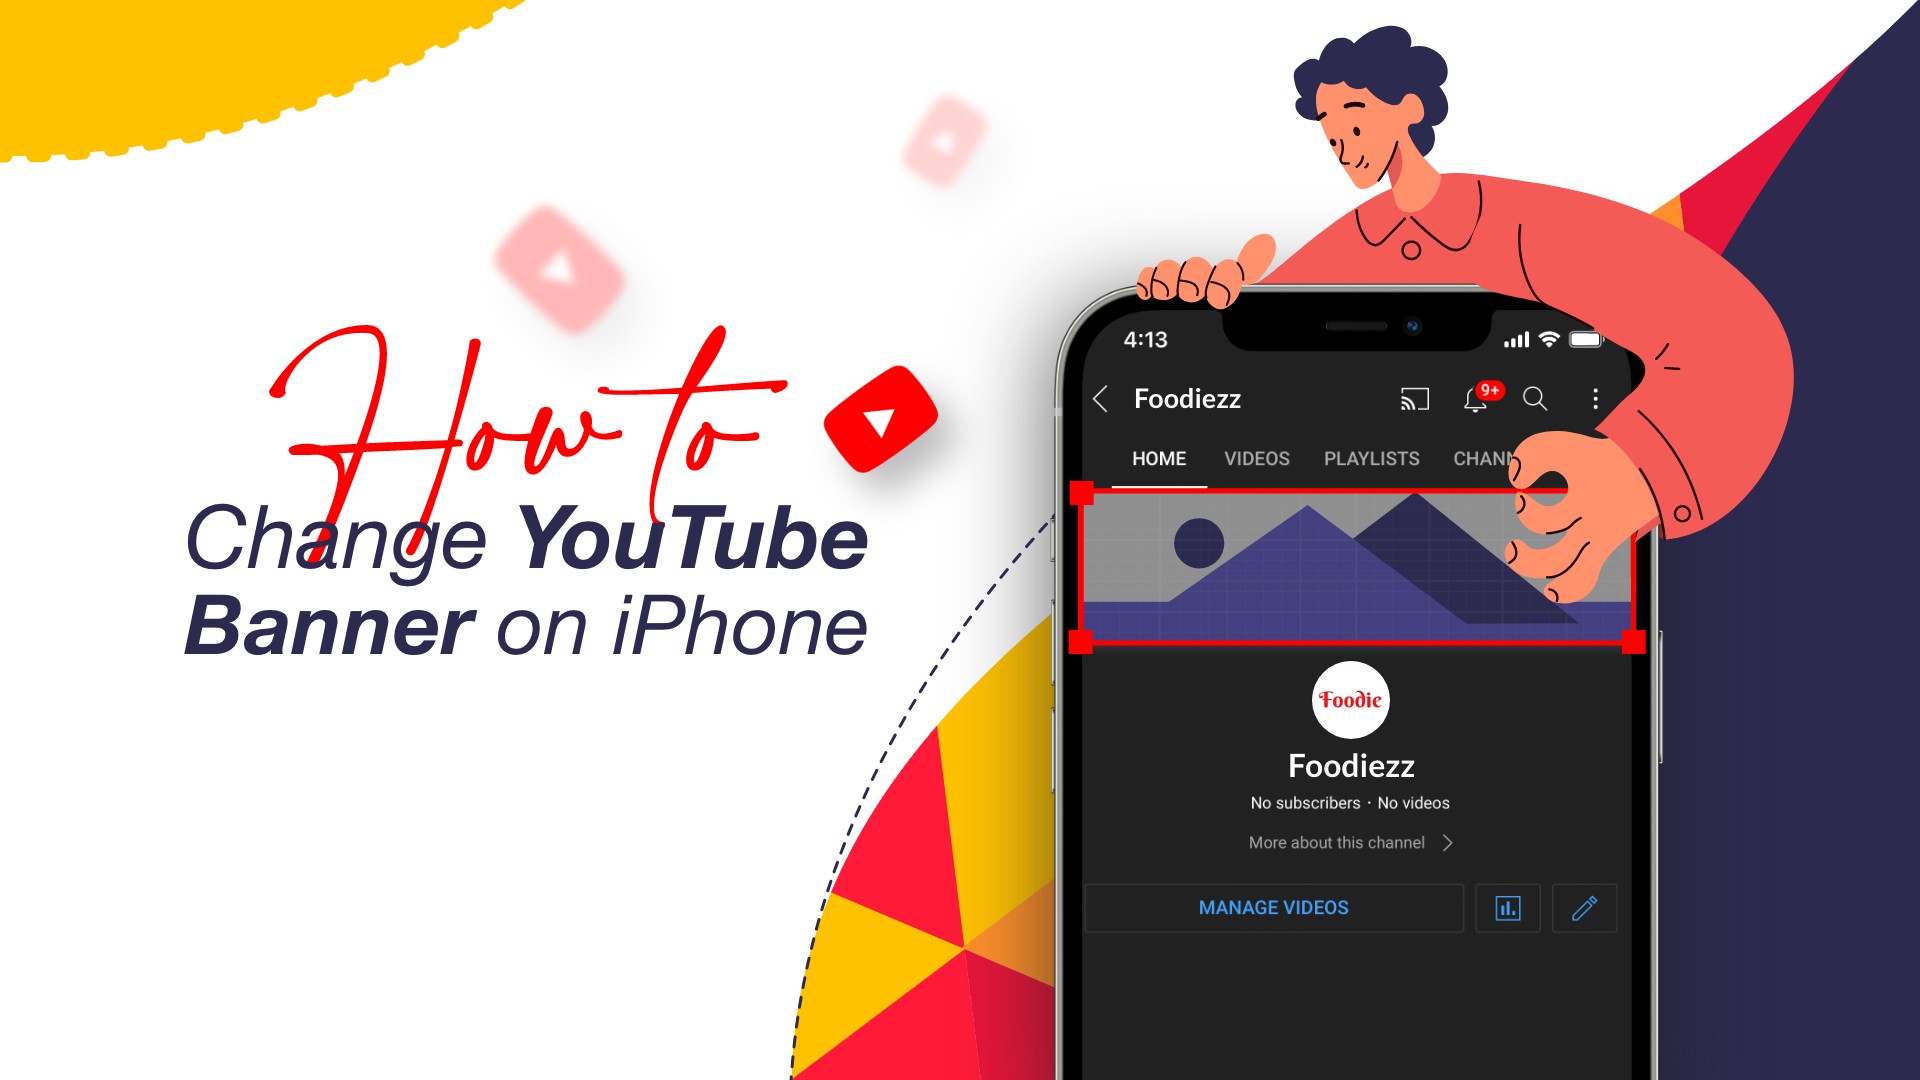 how to change YouTube banner on iPhone